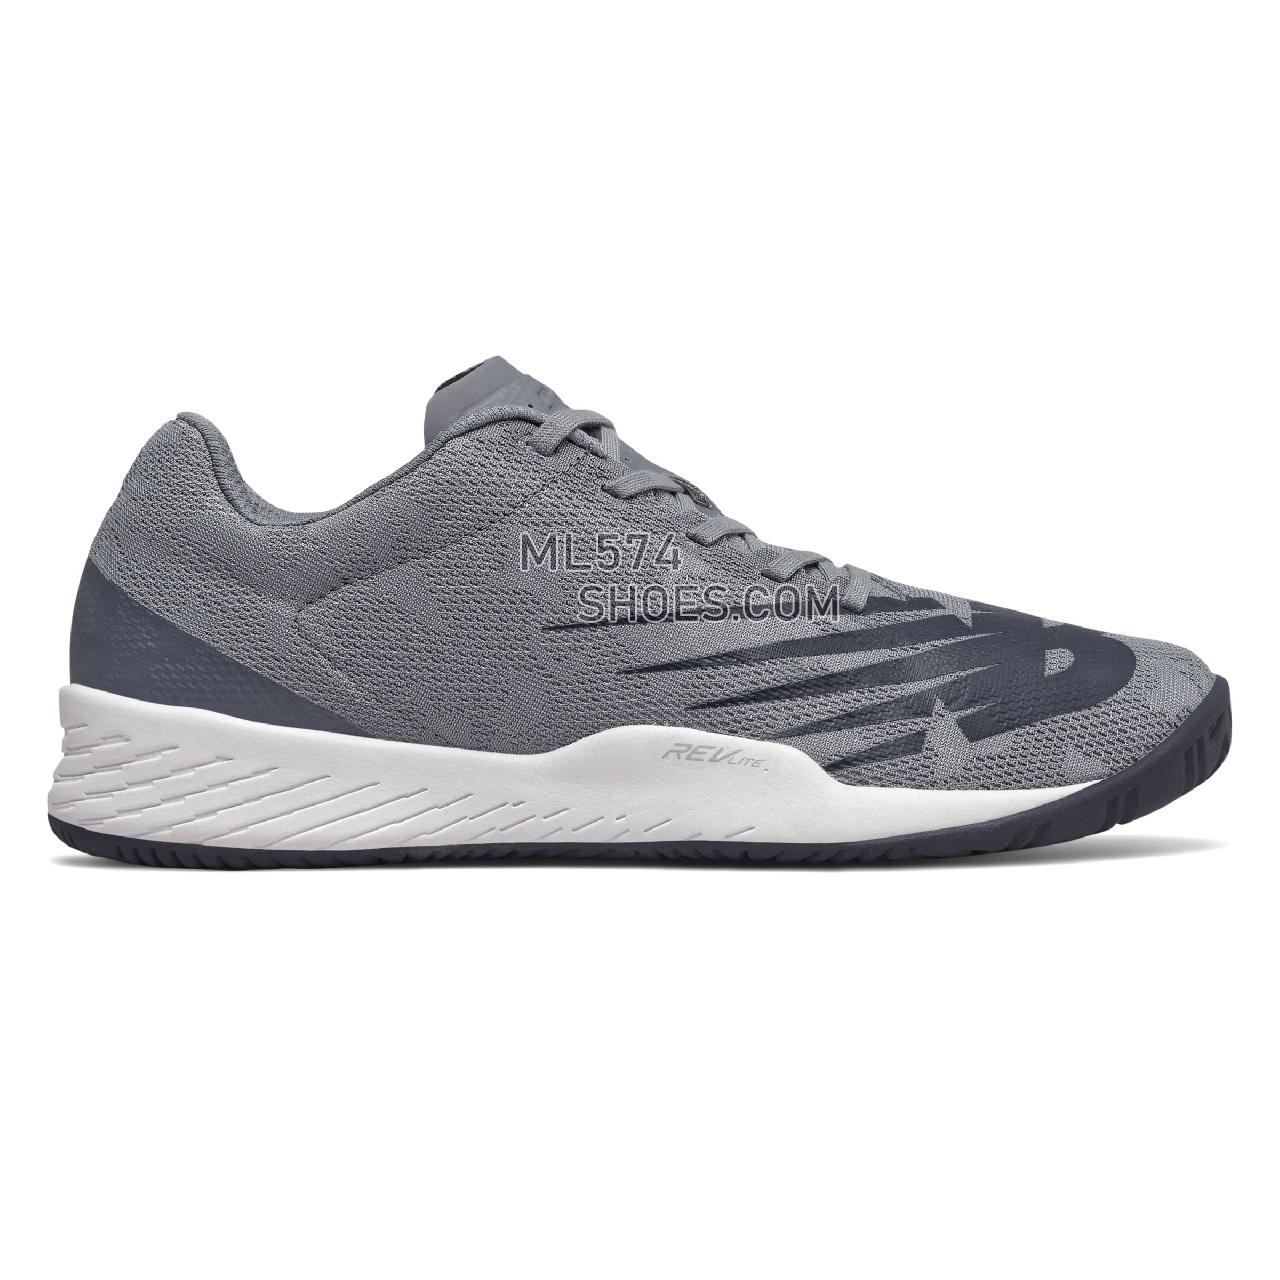 New Balance 896v3 - Men's Tennis - Grey with Pigment - MCH896N3